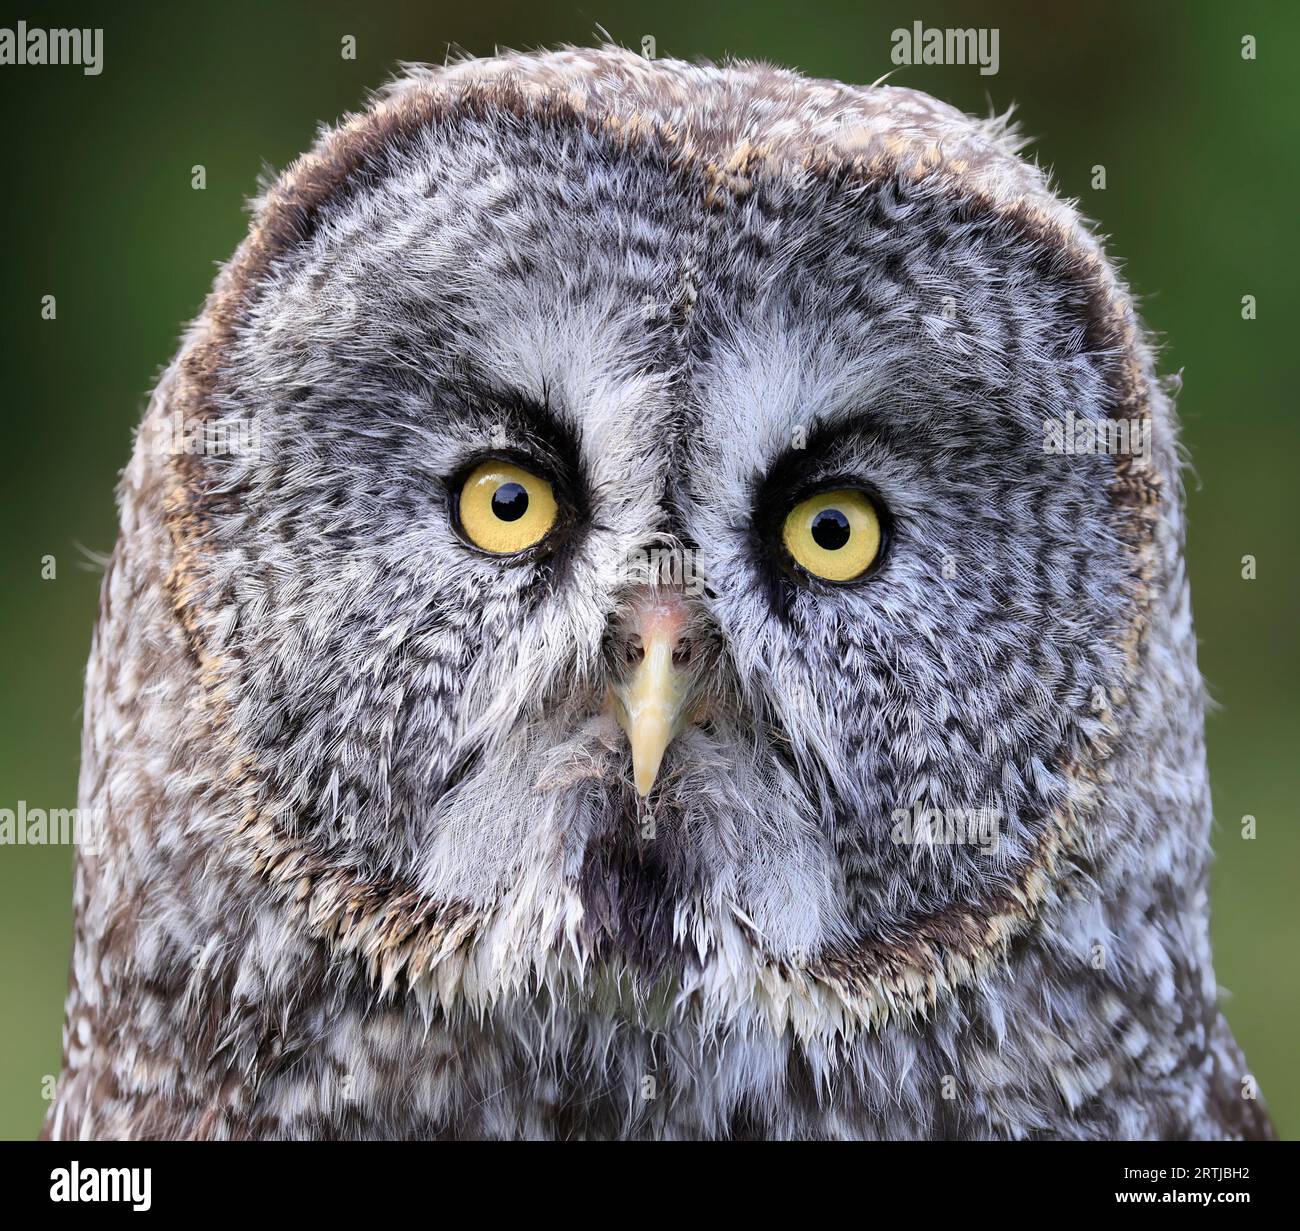 Very detailed Great Grey Owl head isolated on green background Stock Photo